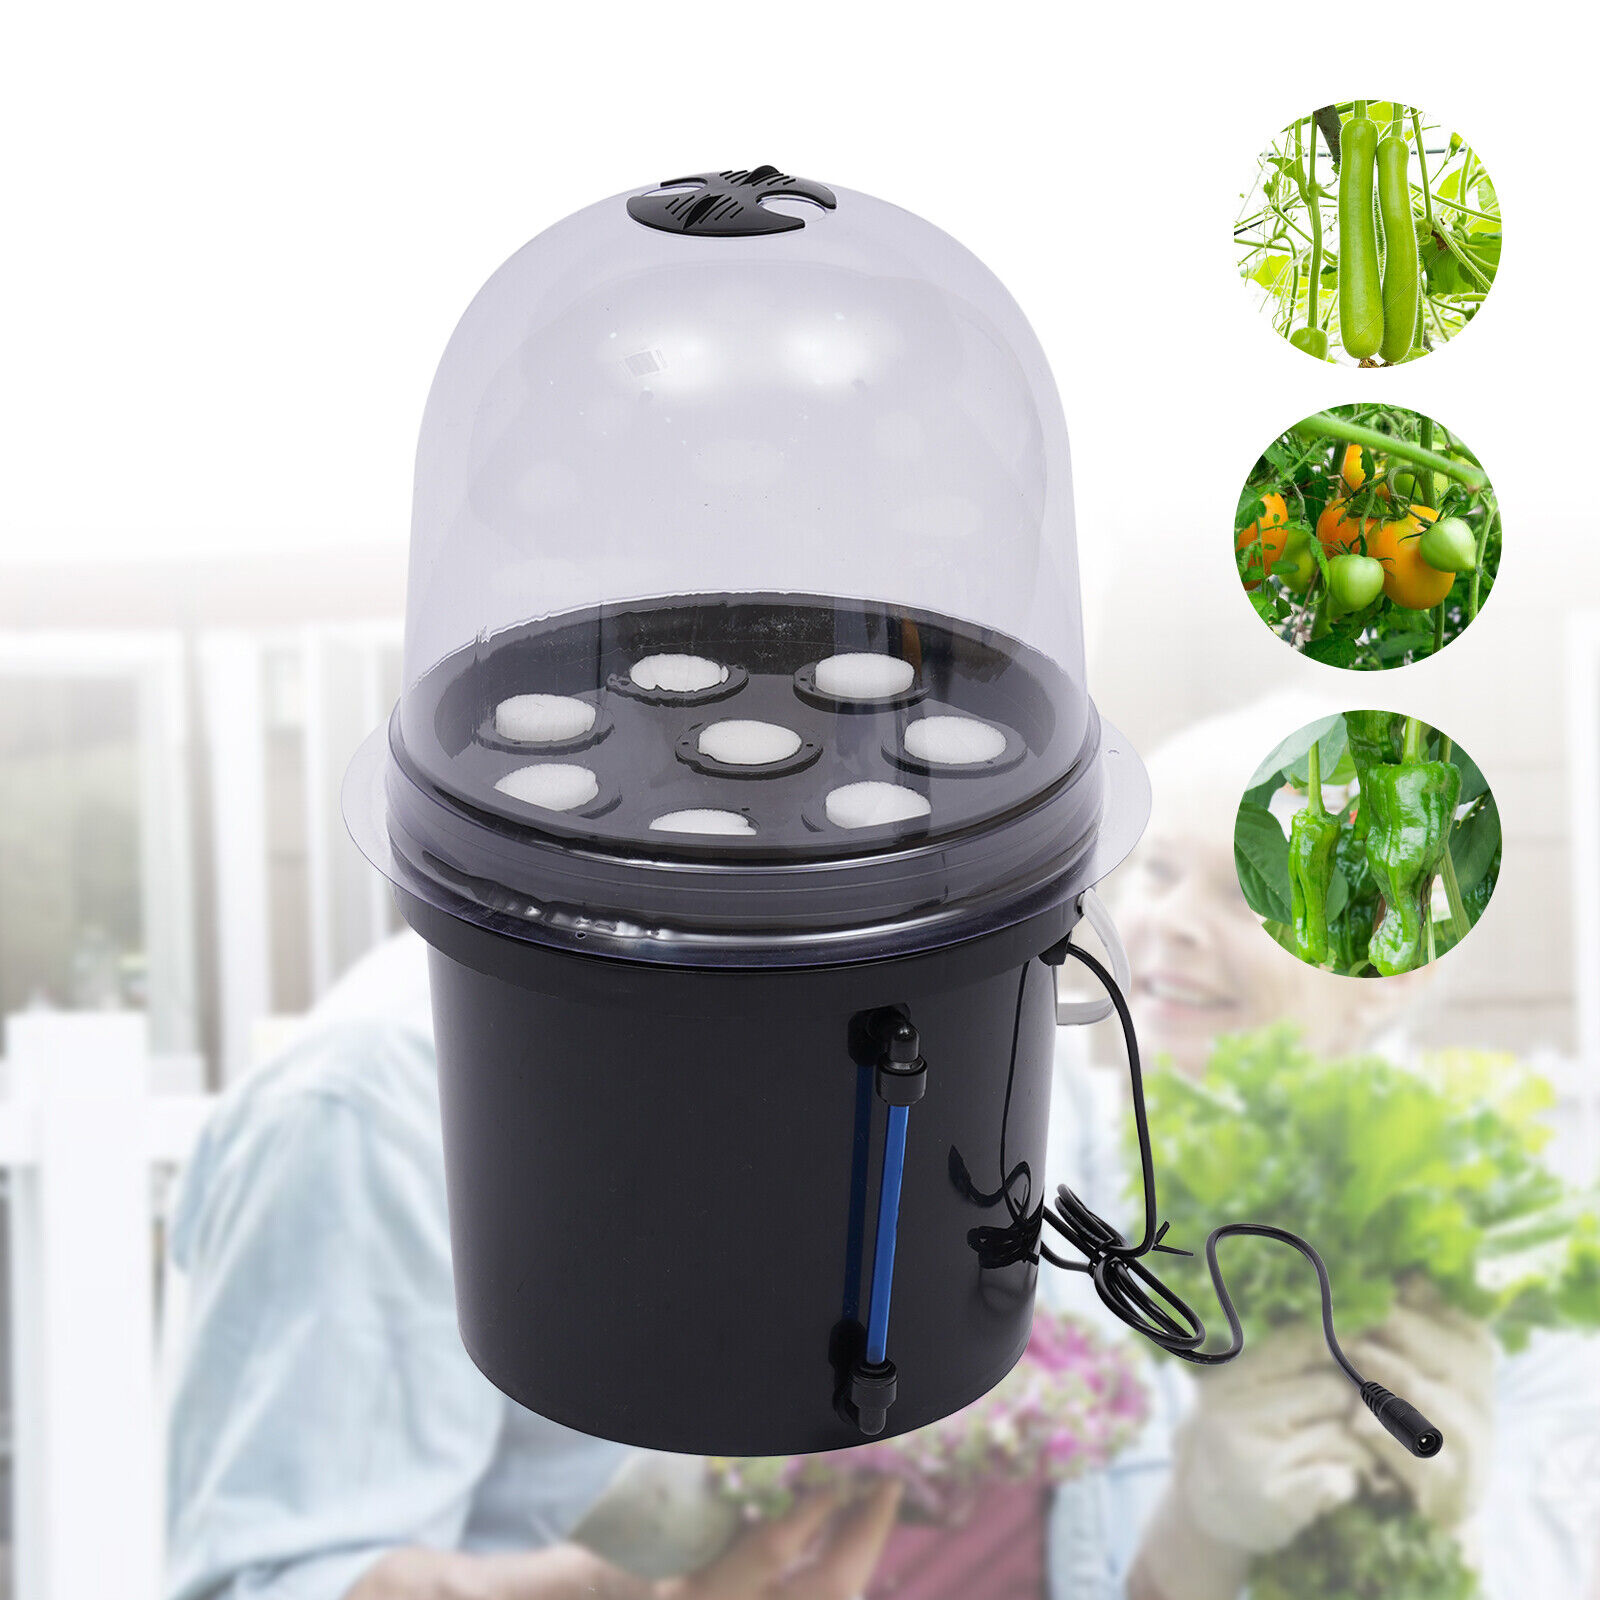 Drip Irrigation Hydroponic Grow System Grow Tent Indoor Grow Kit 8 Holes 